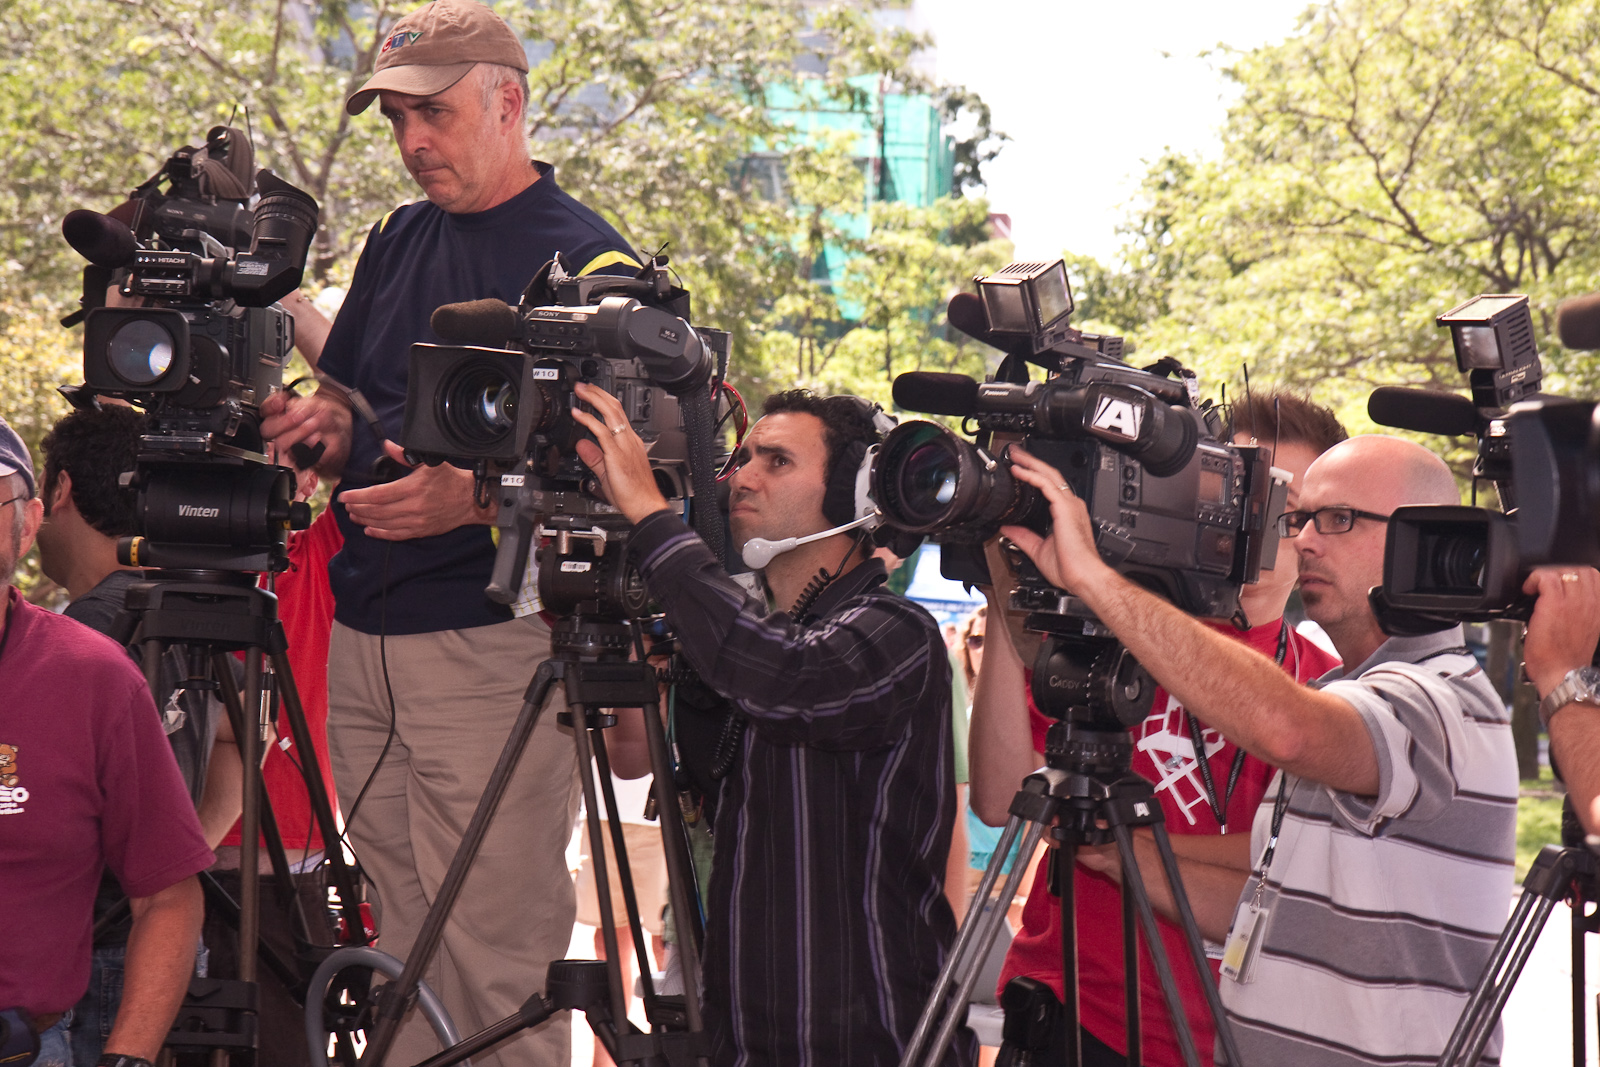 Several people operate four video cameras on tripods close together. One wears a headset.